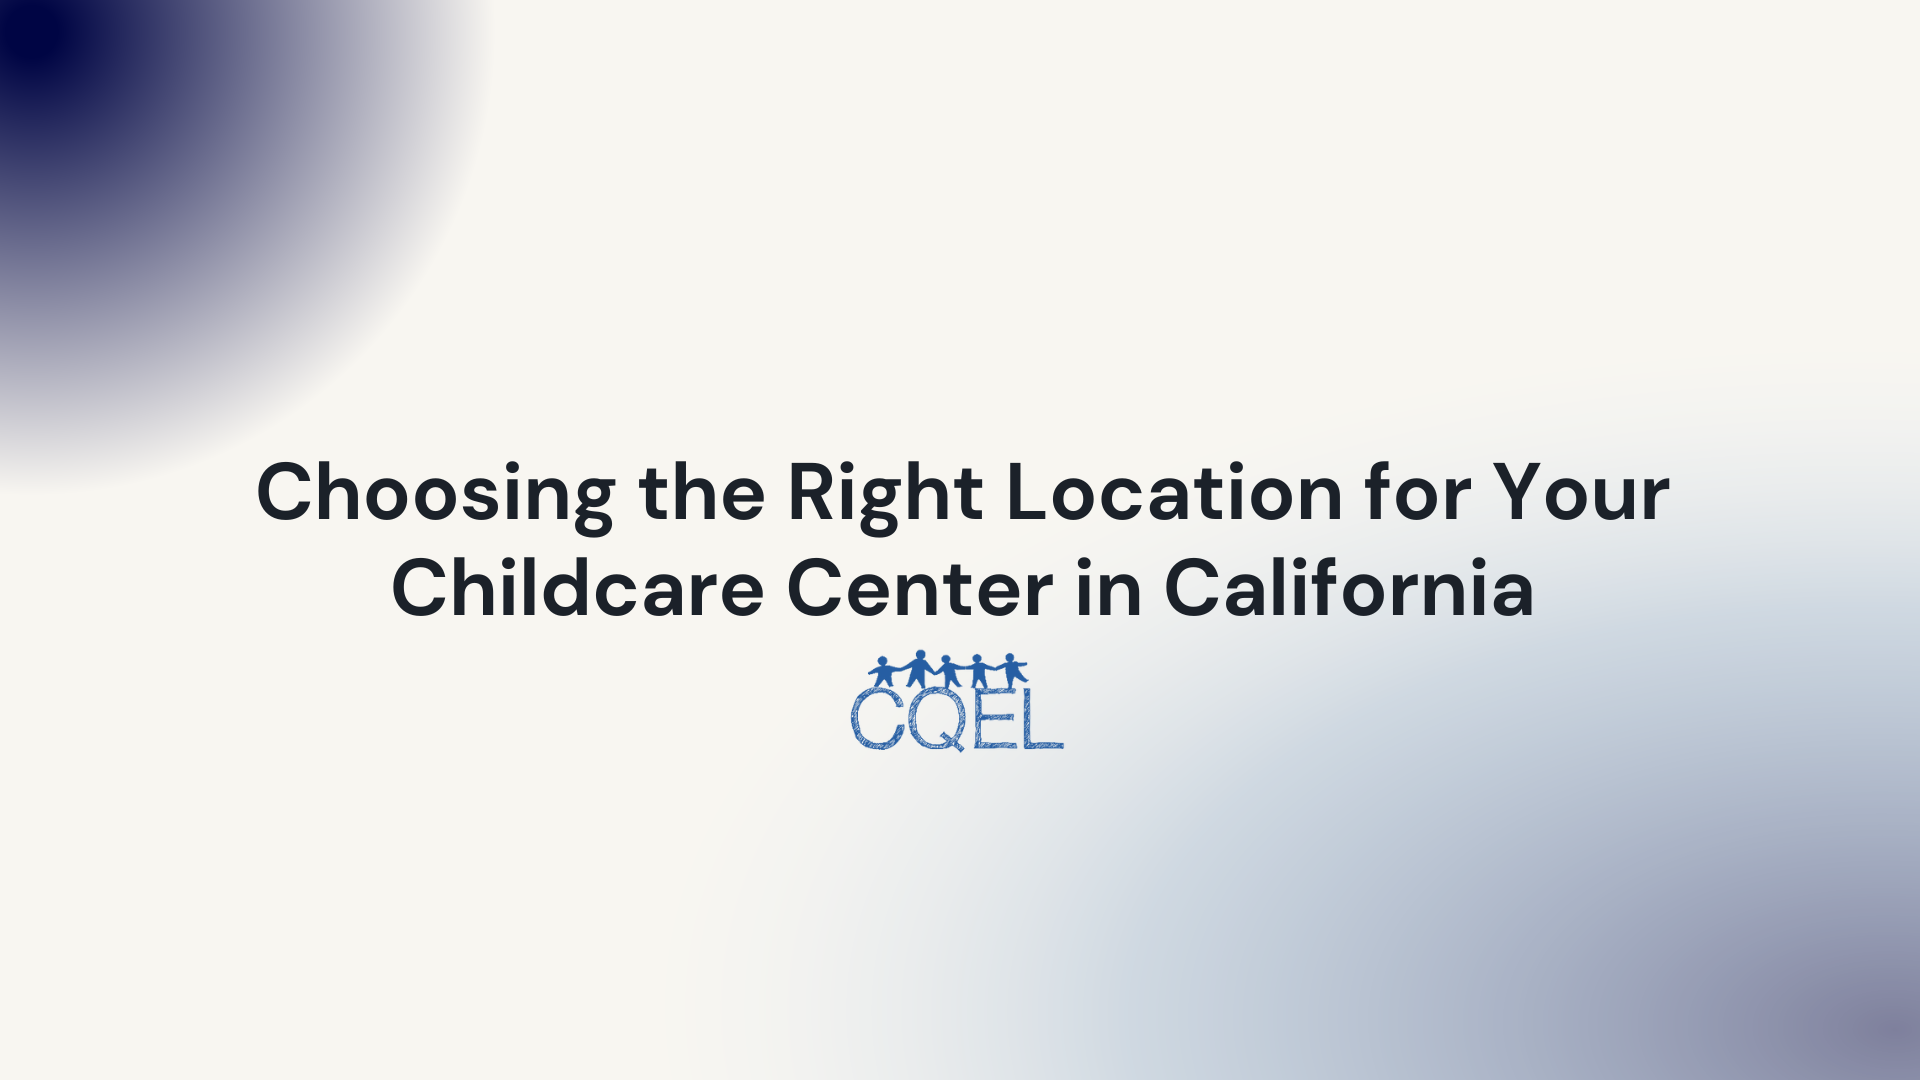 Choosing the Right Location for Your Childcare Center in California